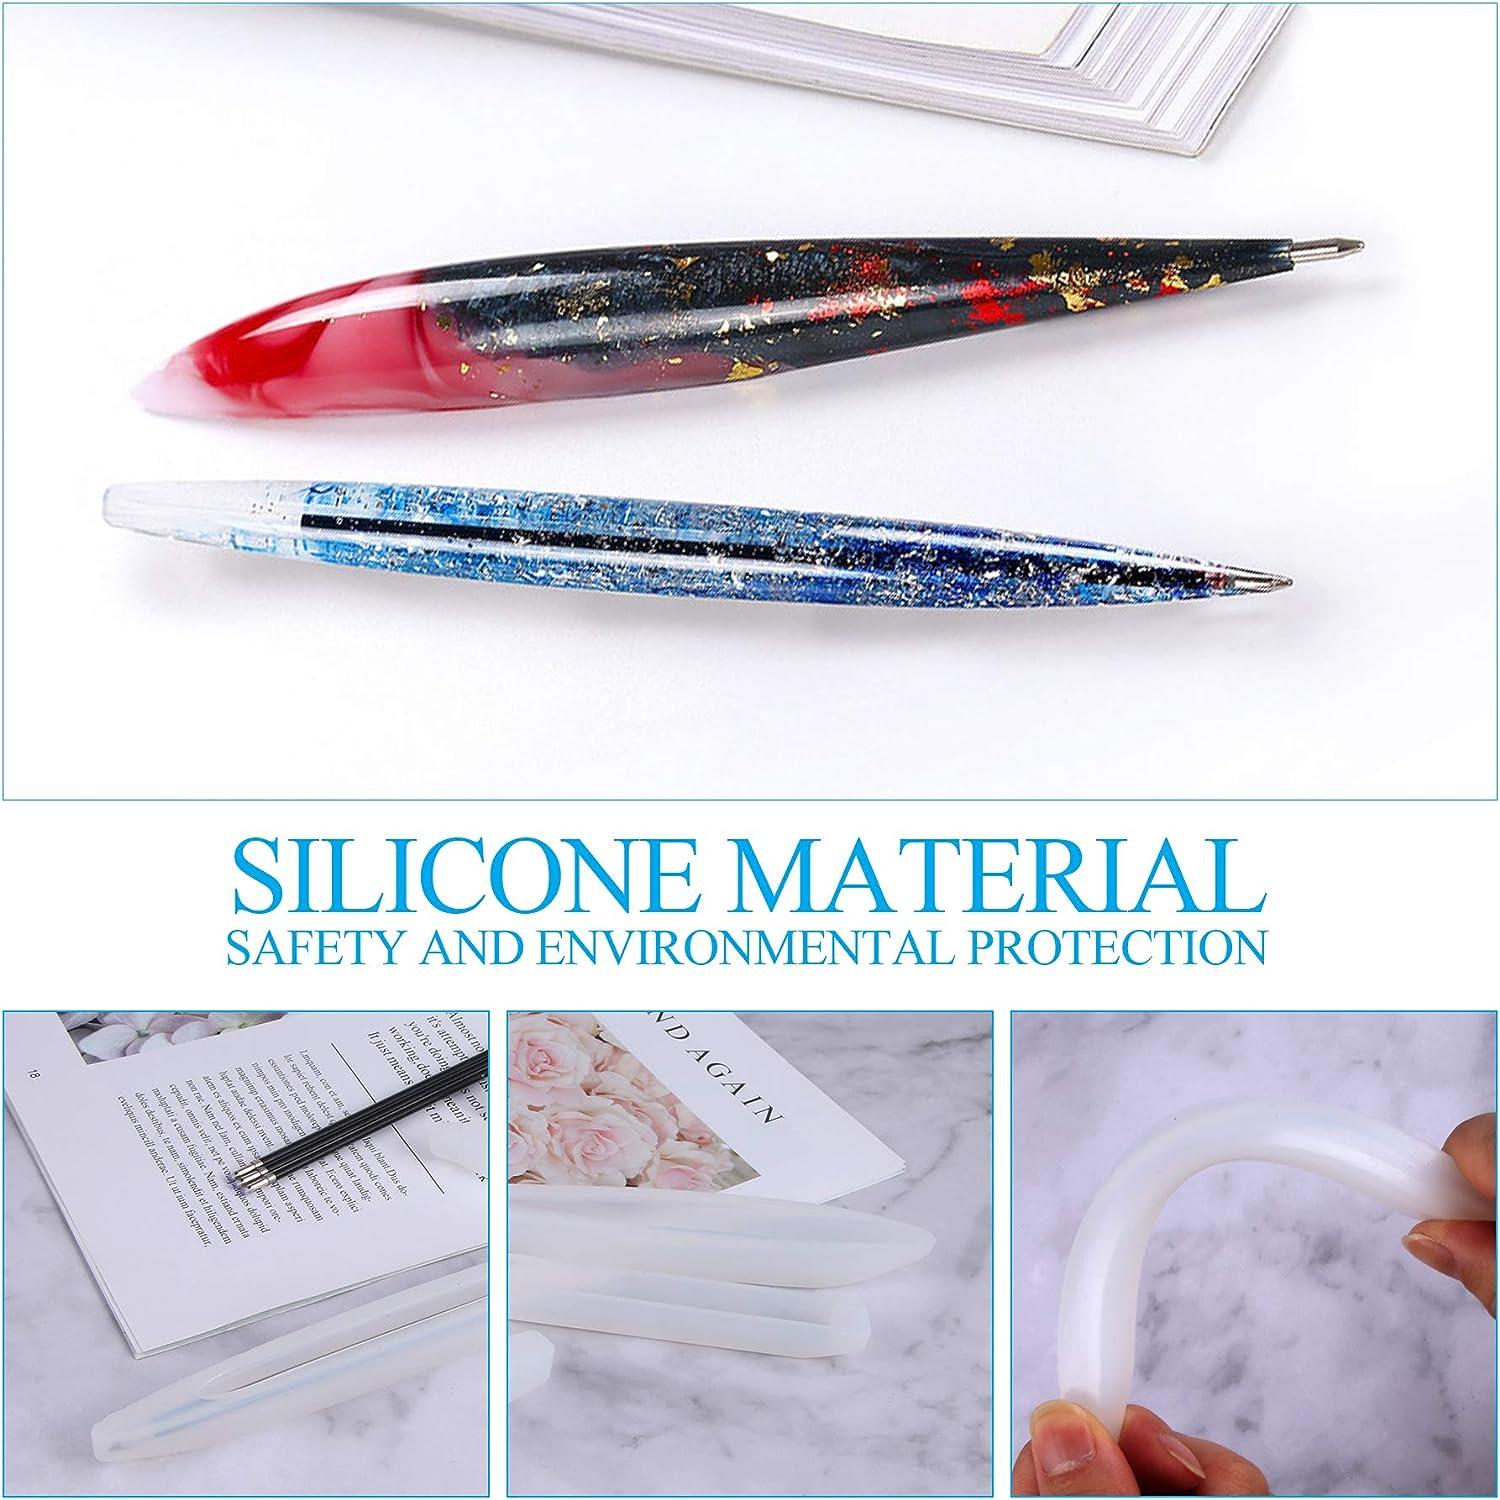 Pen Resin Mold Silicone Casting Mold Pen Shape Mold with 5 Pieces Ballpoint  Refill Pens for